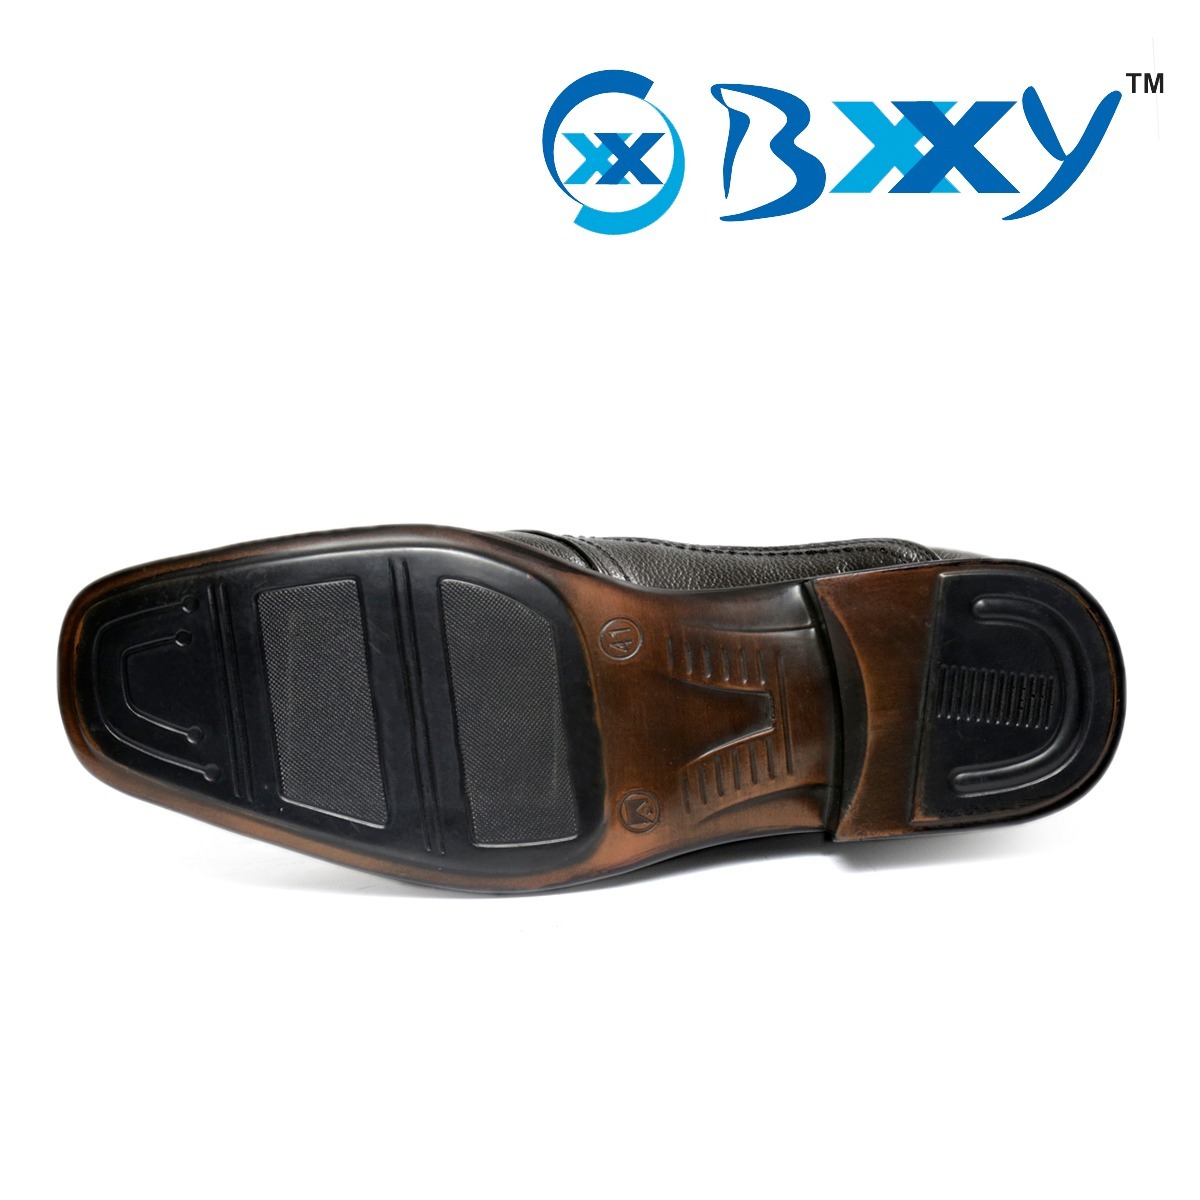 LEATHER FORMAL SHOES FOR MEN'S ON PVC SOLE